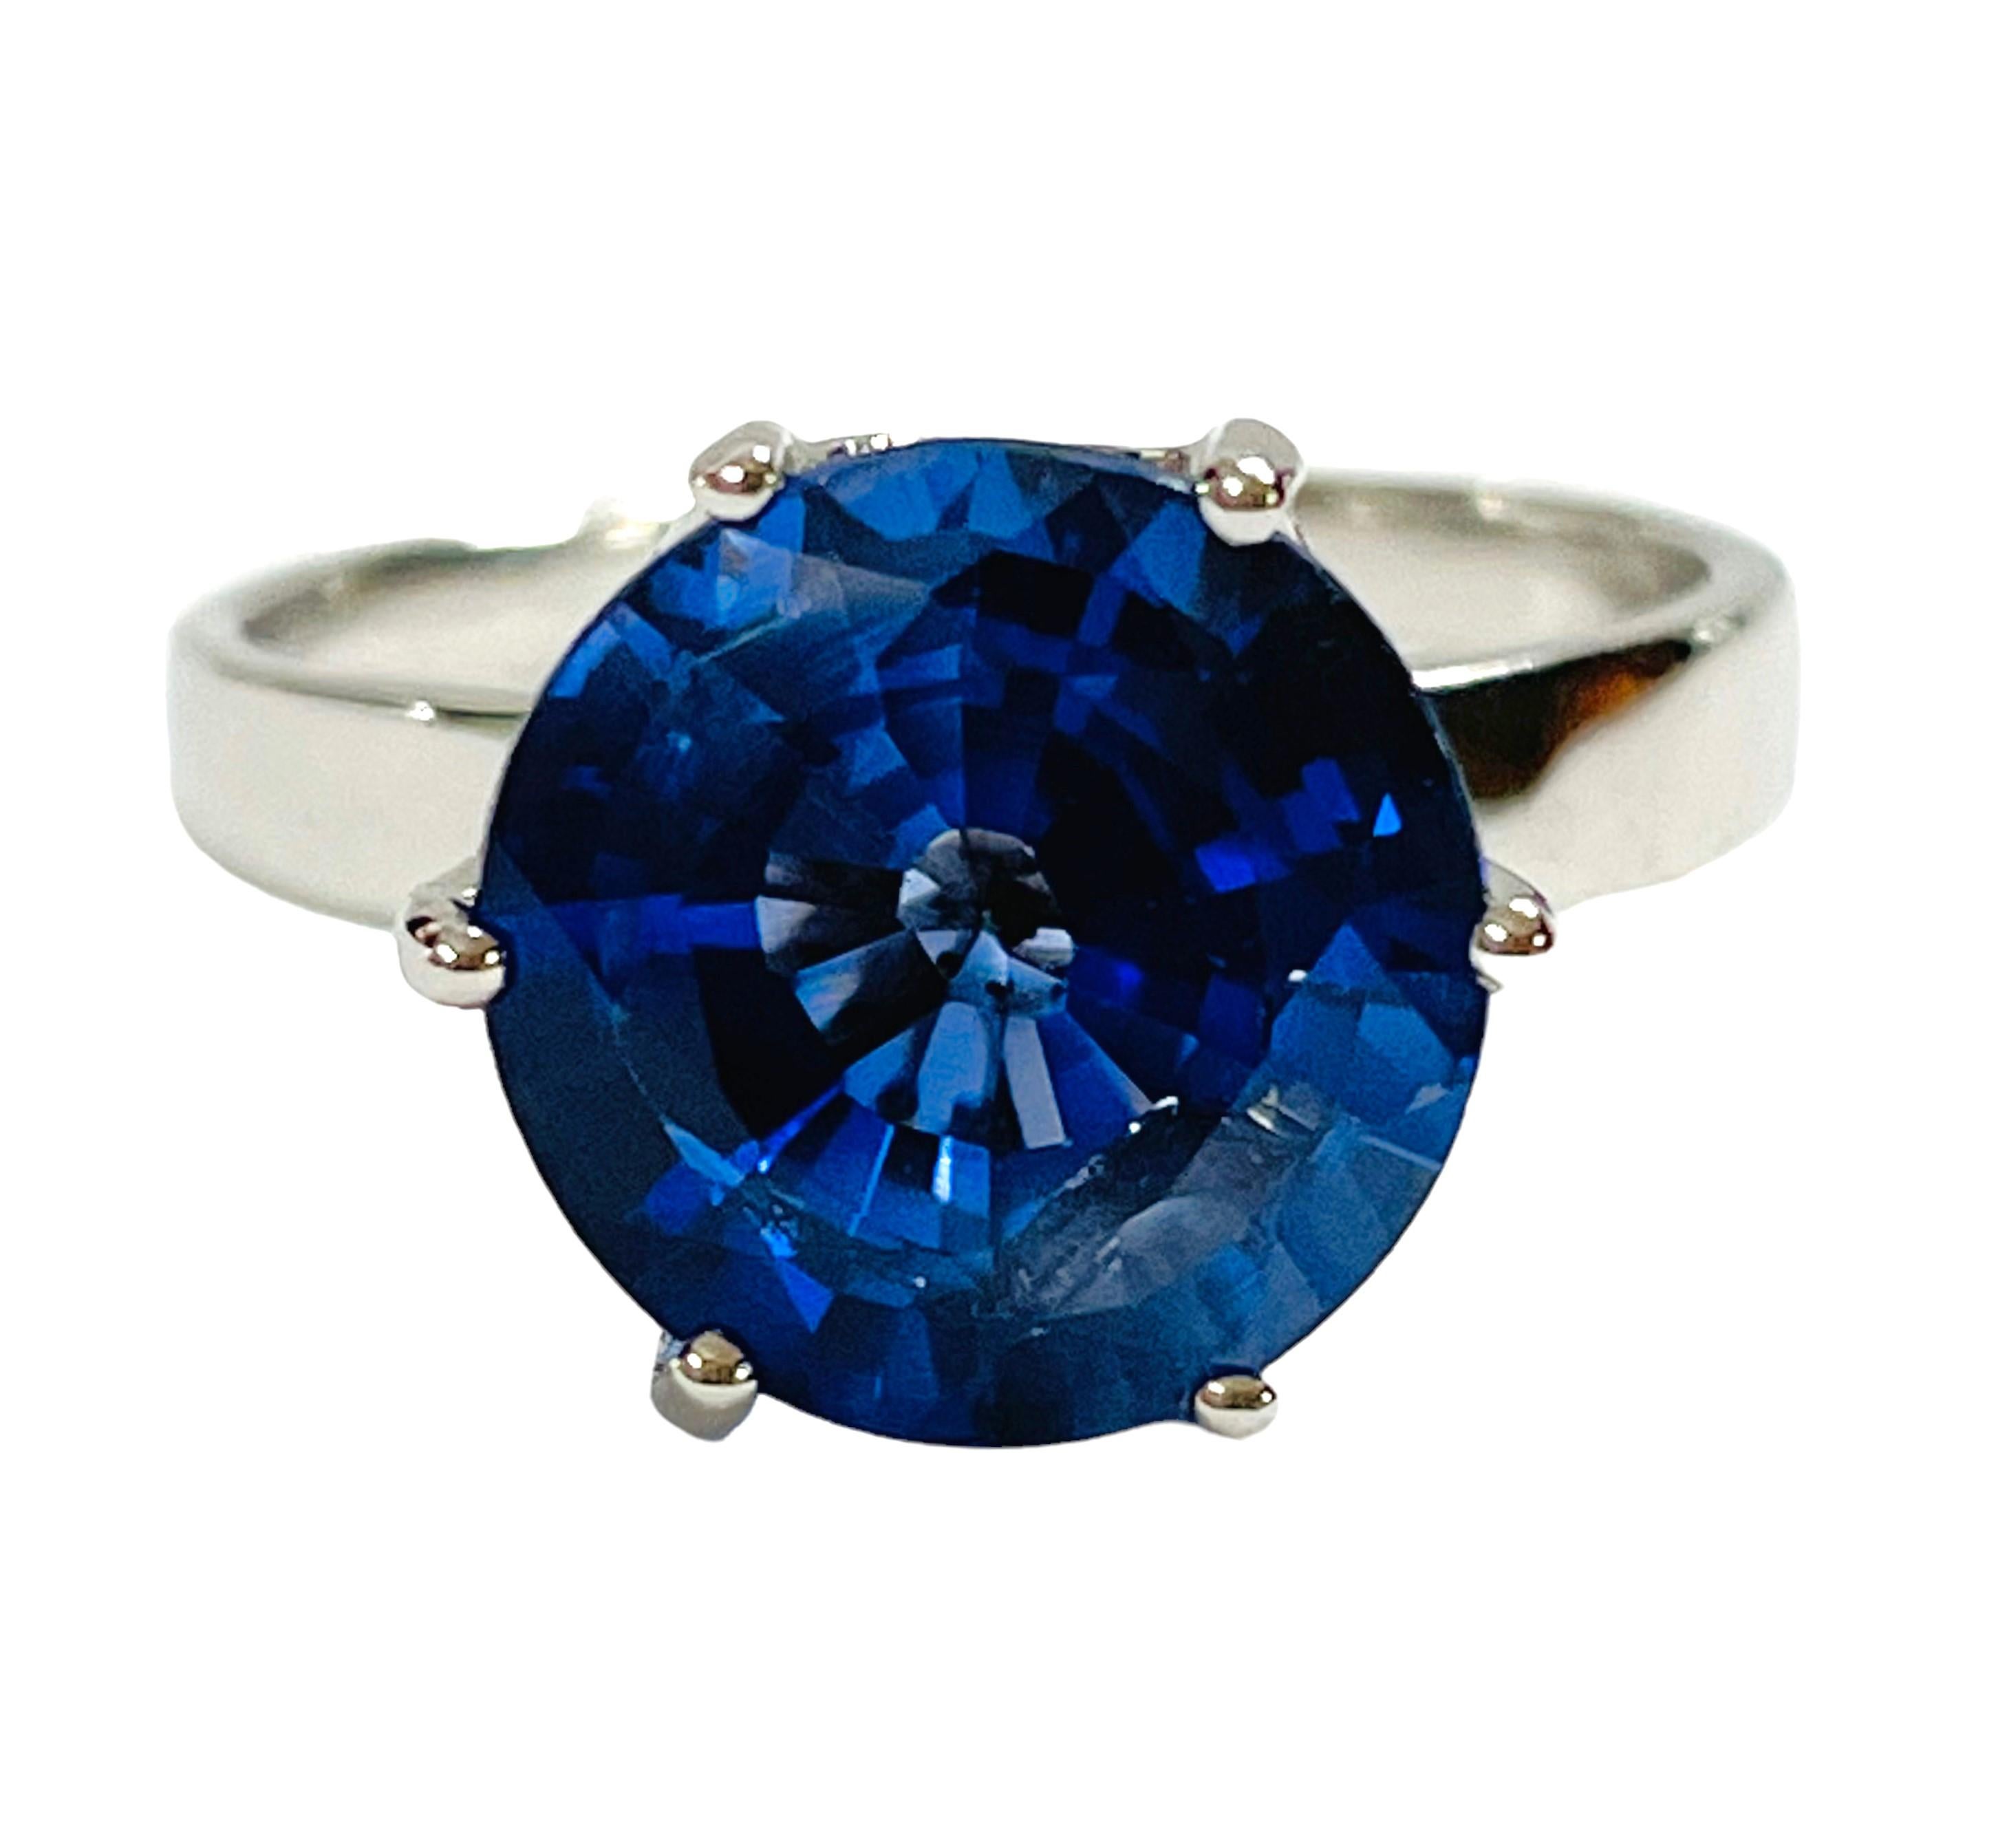 The sapphire was mined in Africa and is just exquisite. It is a beautiful round cut and is 4.40 Ct   The main stone is 9 x 9 mm.  Very beautiful  indeed.  Sure to get noticed.  The weight in Grams is 3.48.  I have many items on auction that have